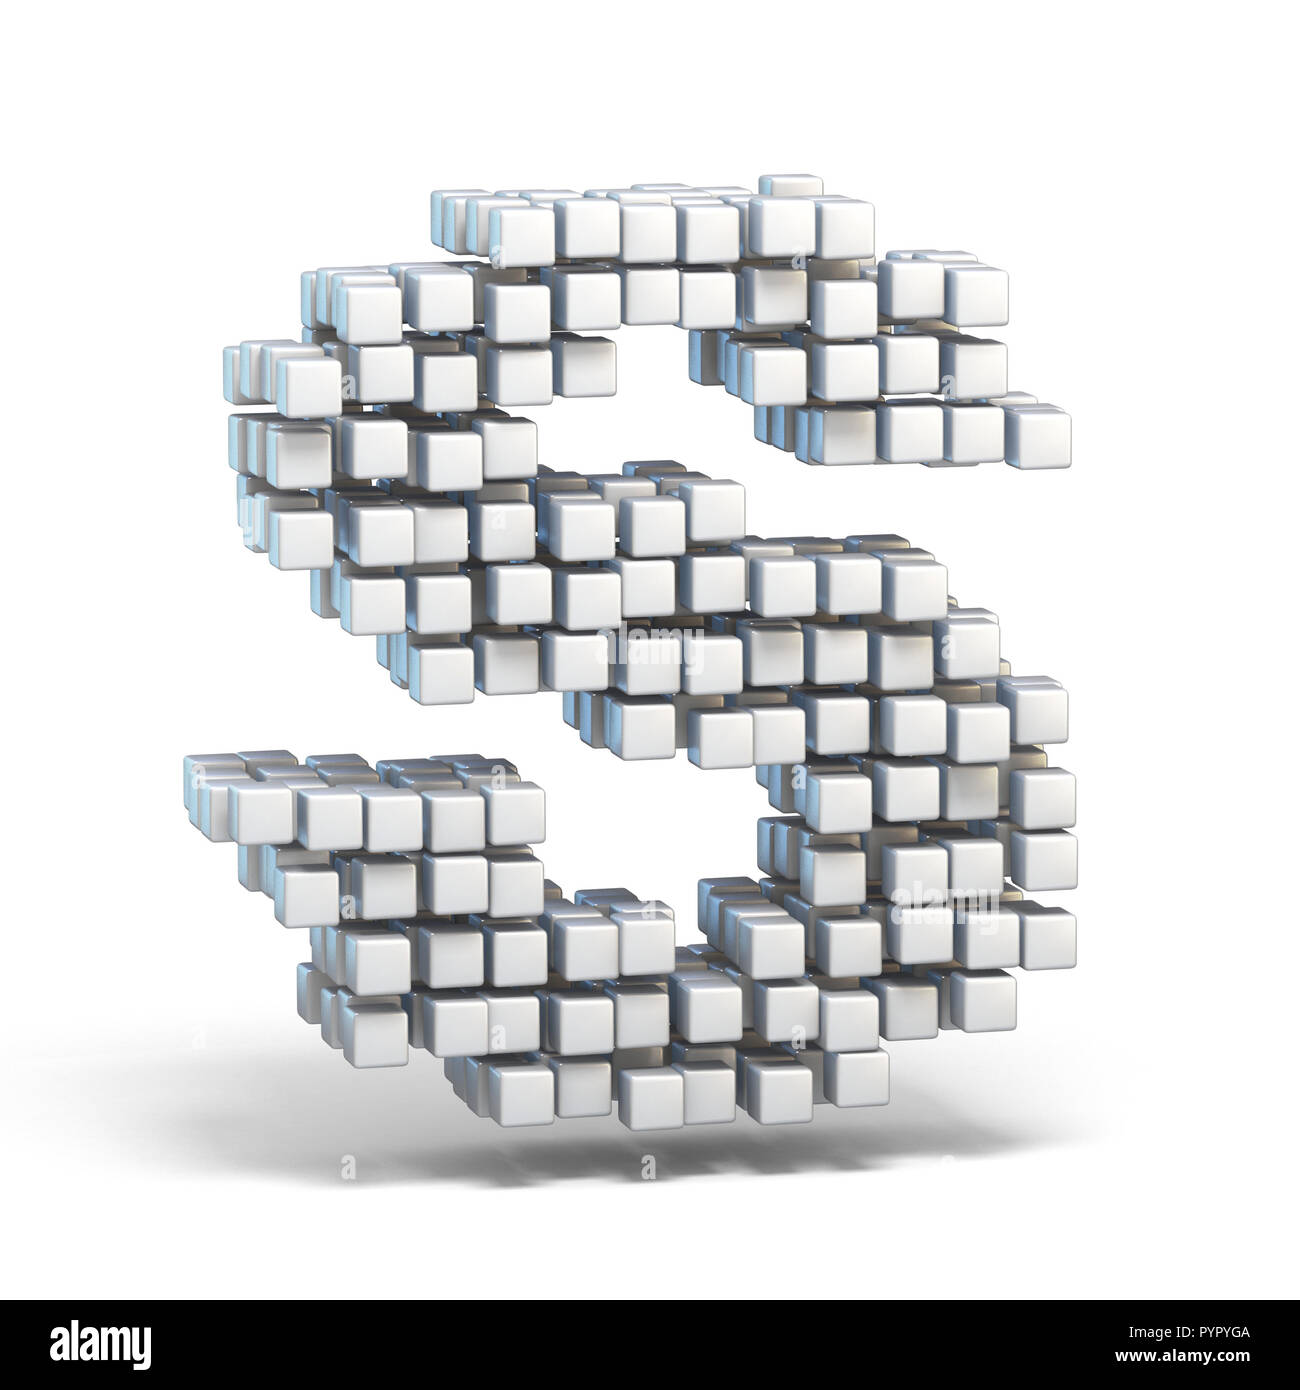 White voxel cubes font Letter S 3D render illustration isolated on white  background Stock Photo - Alamy